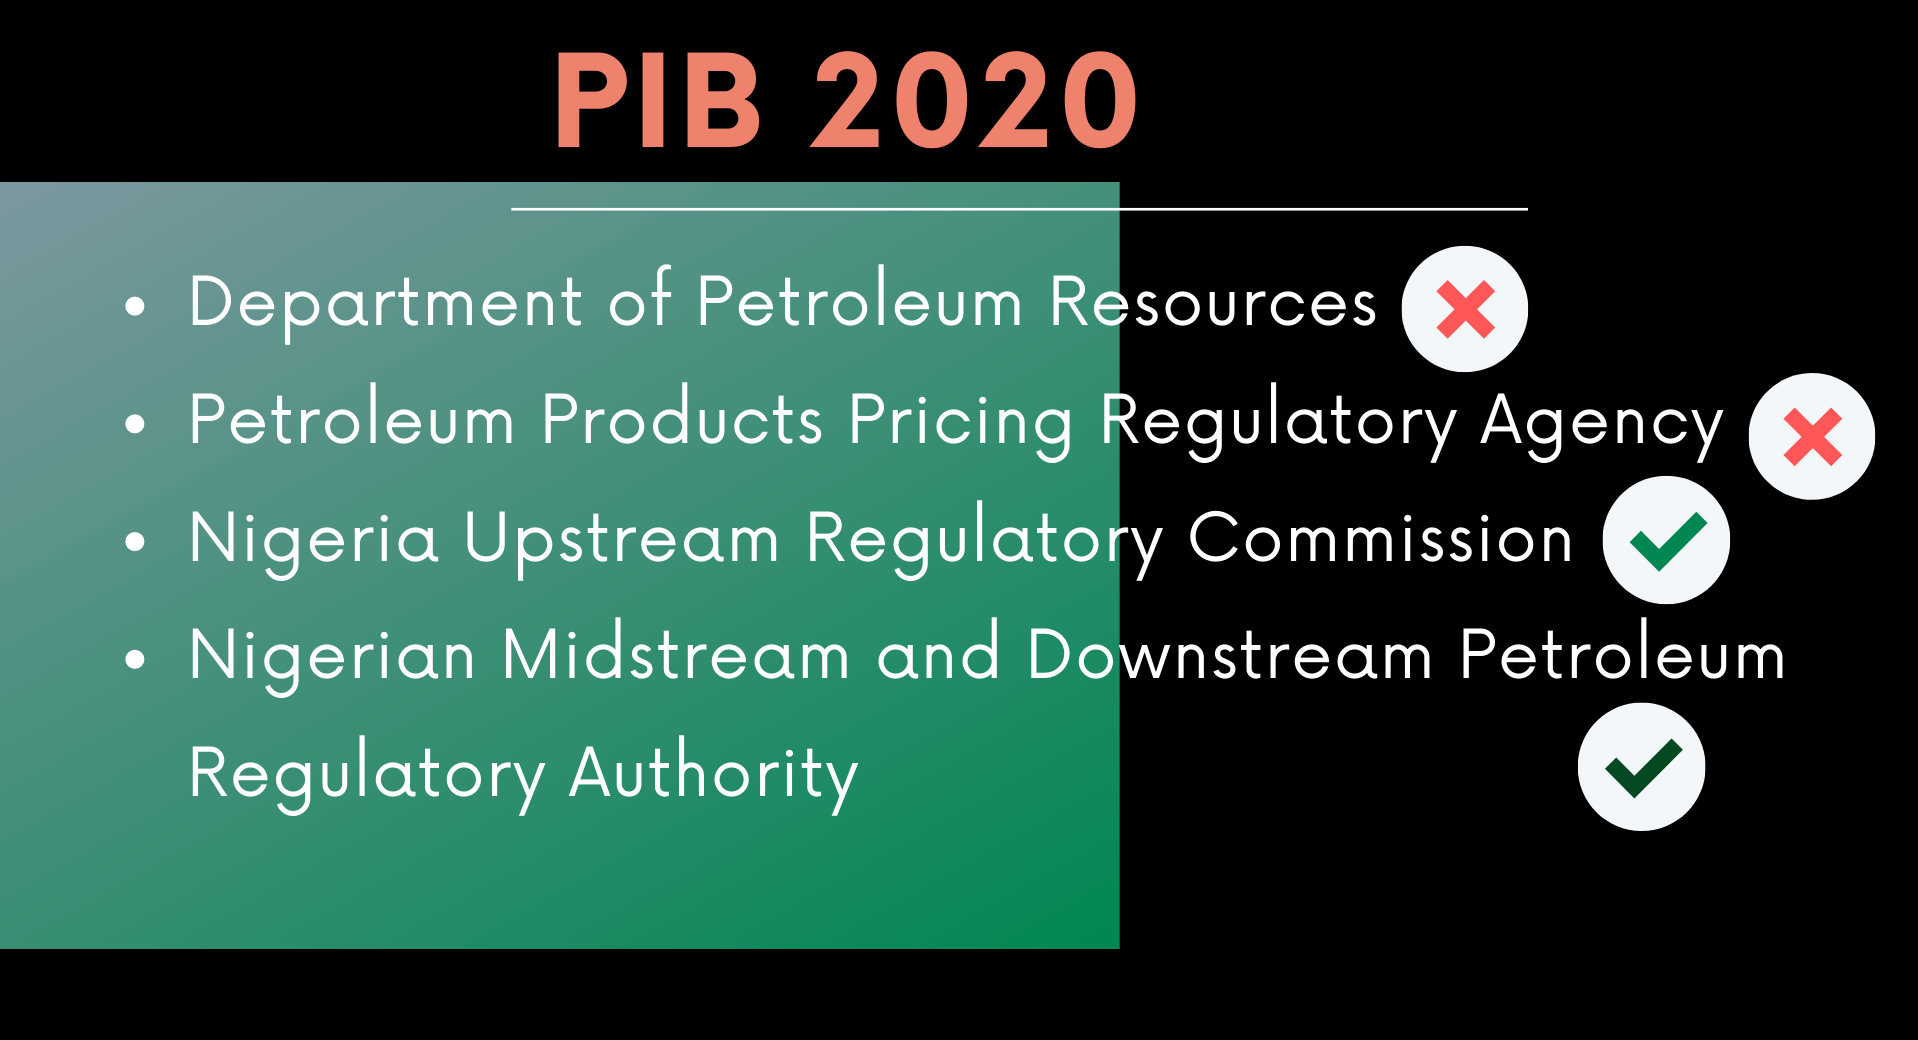 Oil And Gas Regulation Under The Petroleum Industry Bill 2020